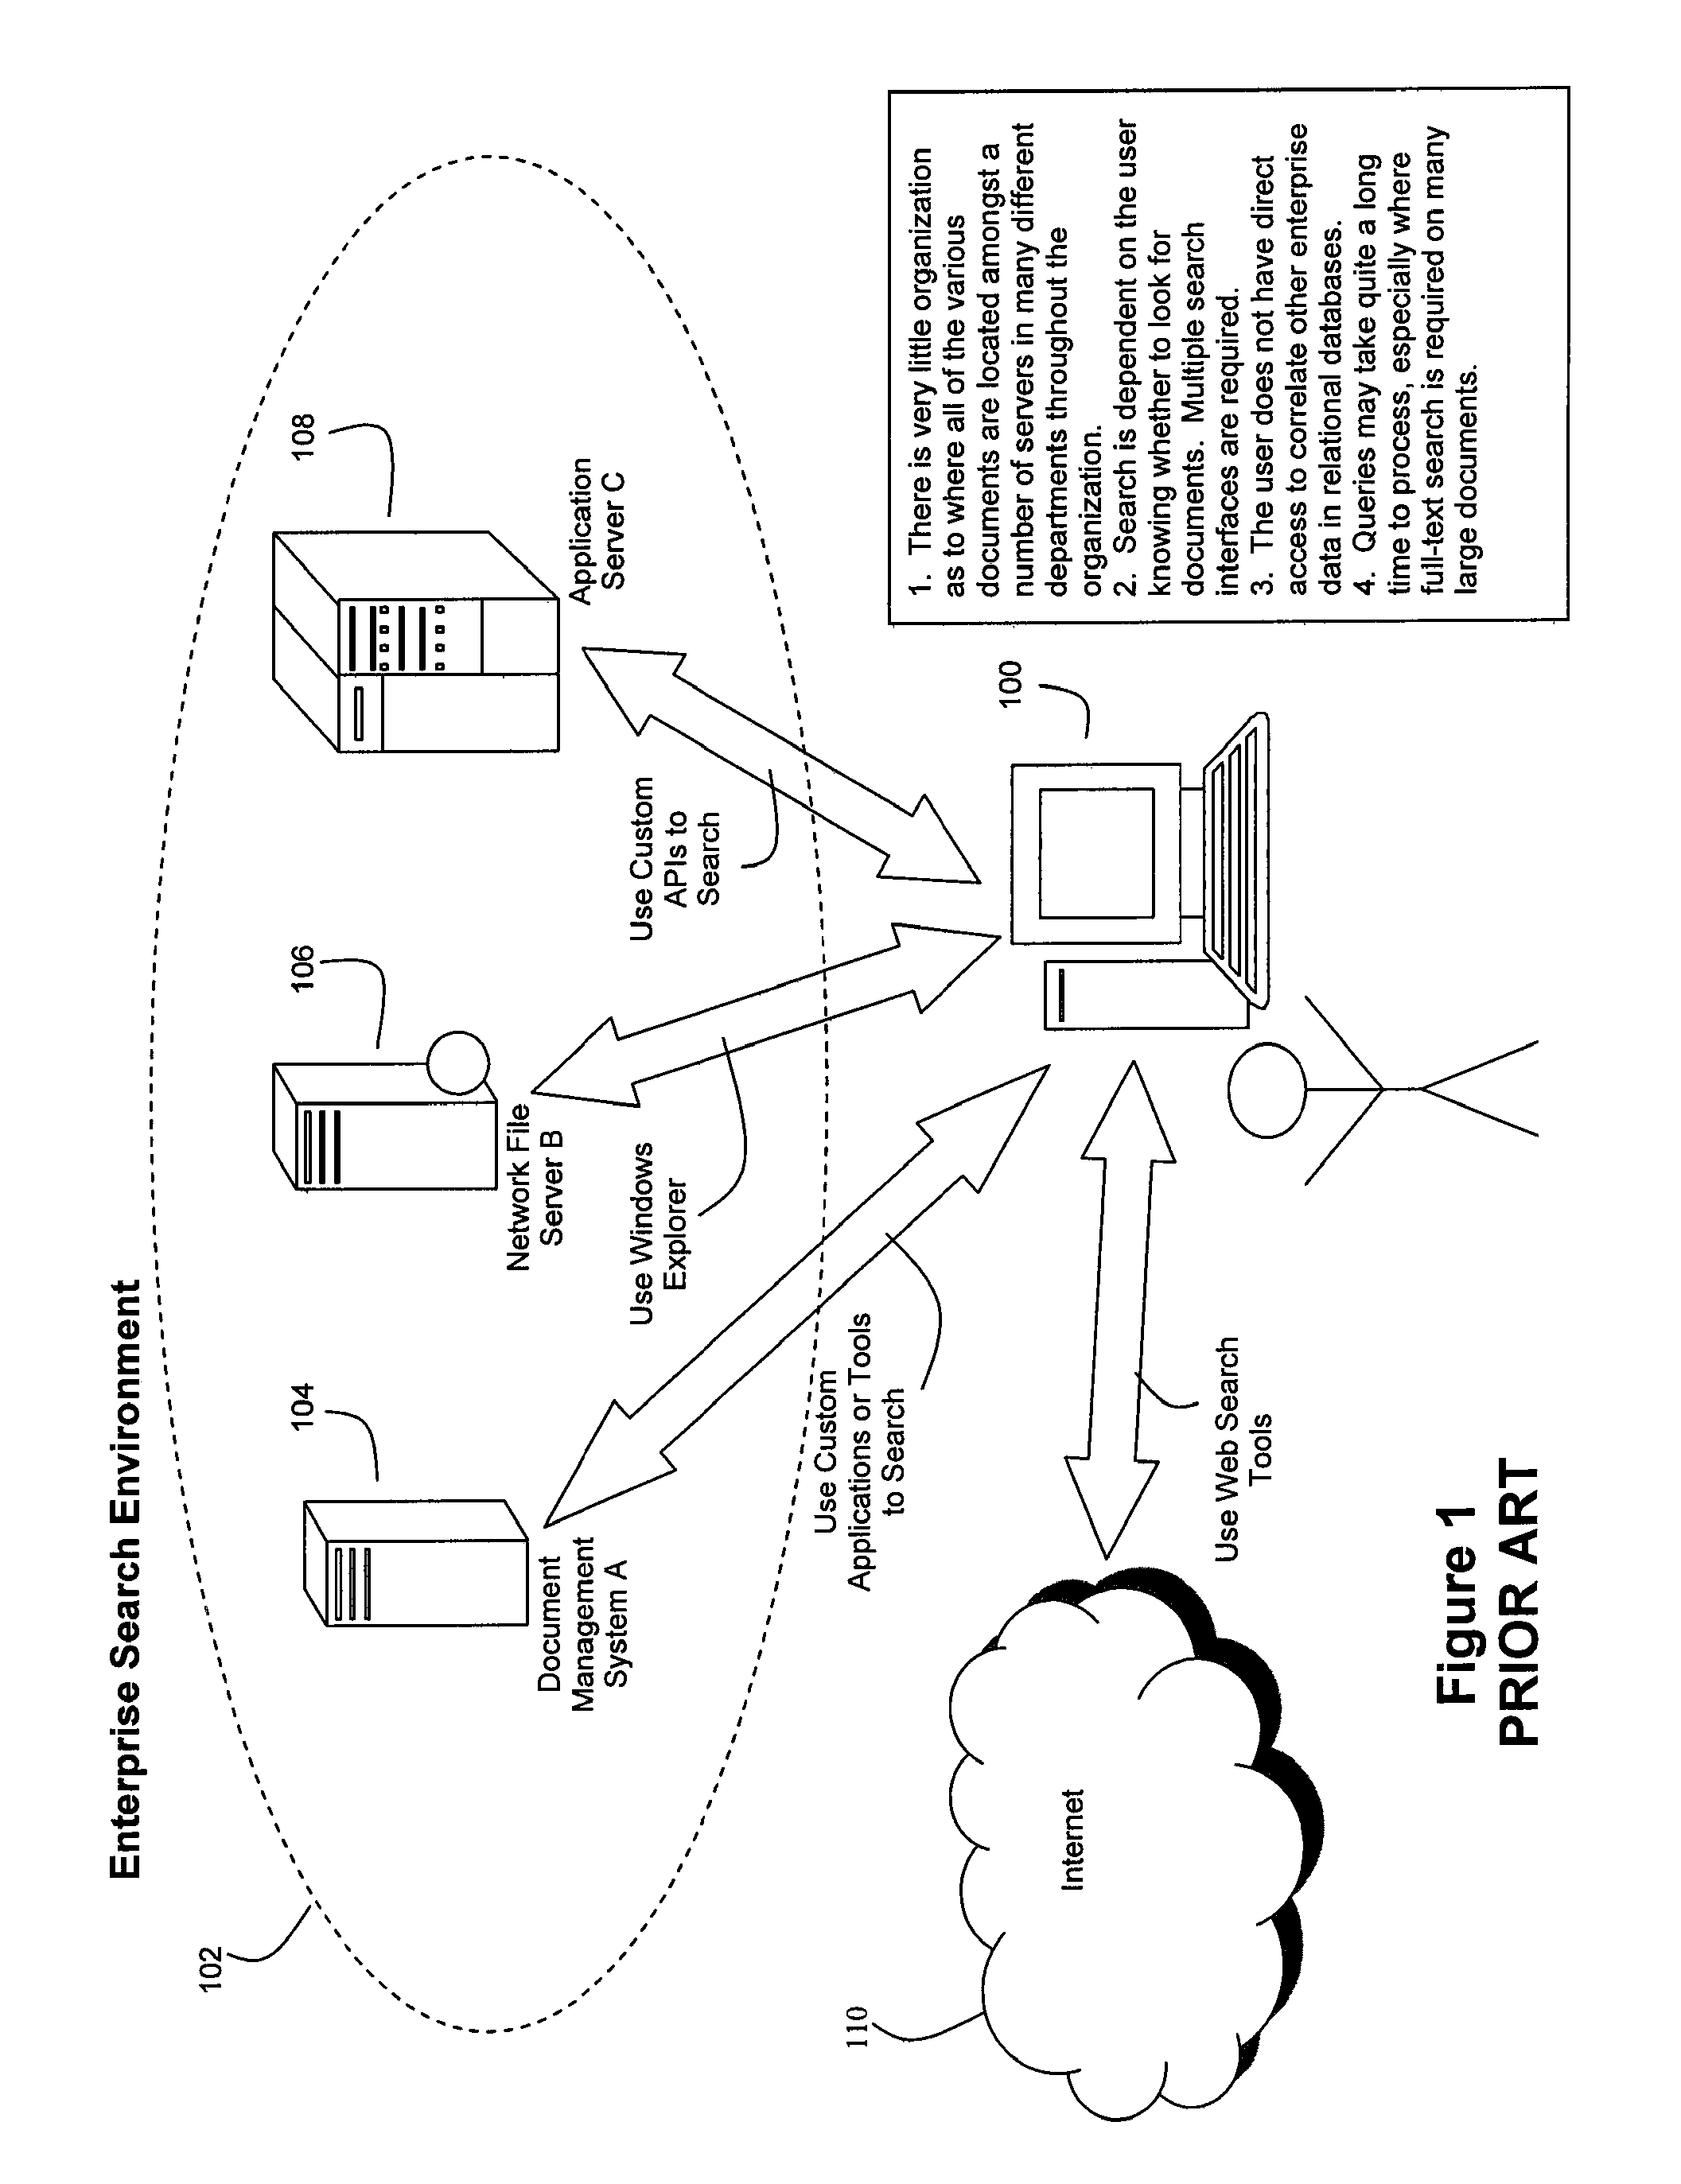 Method and system for high performance integration, processing and searching of structured and unstructured data using coprocessors